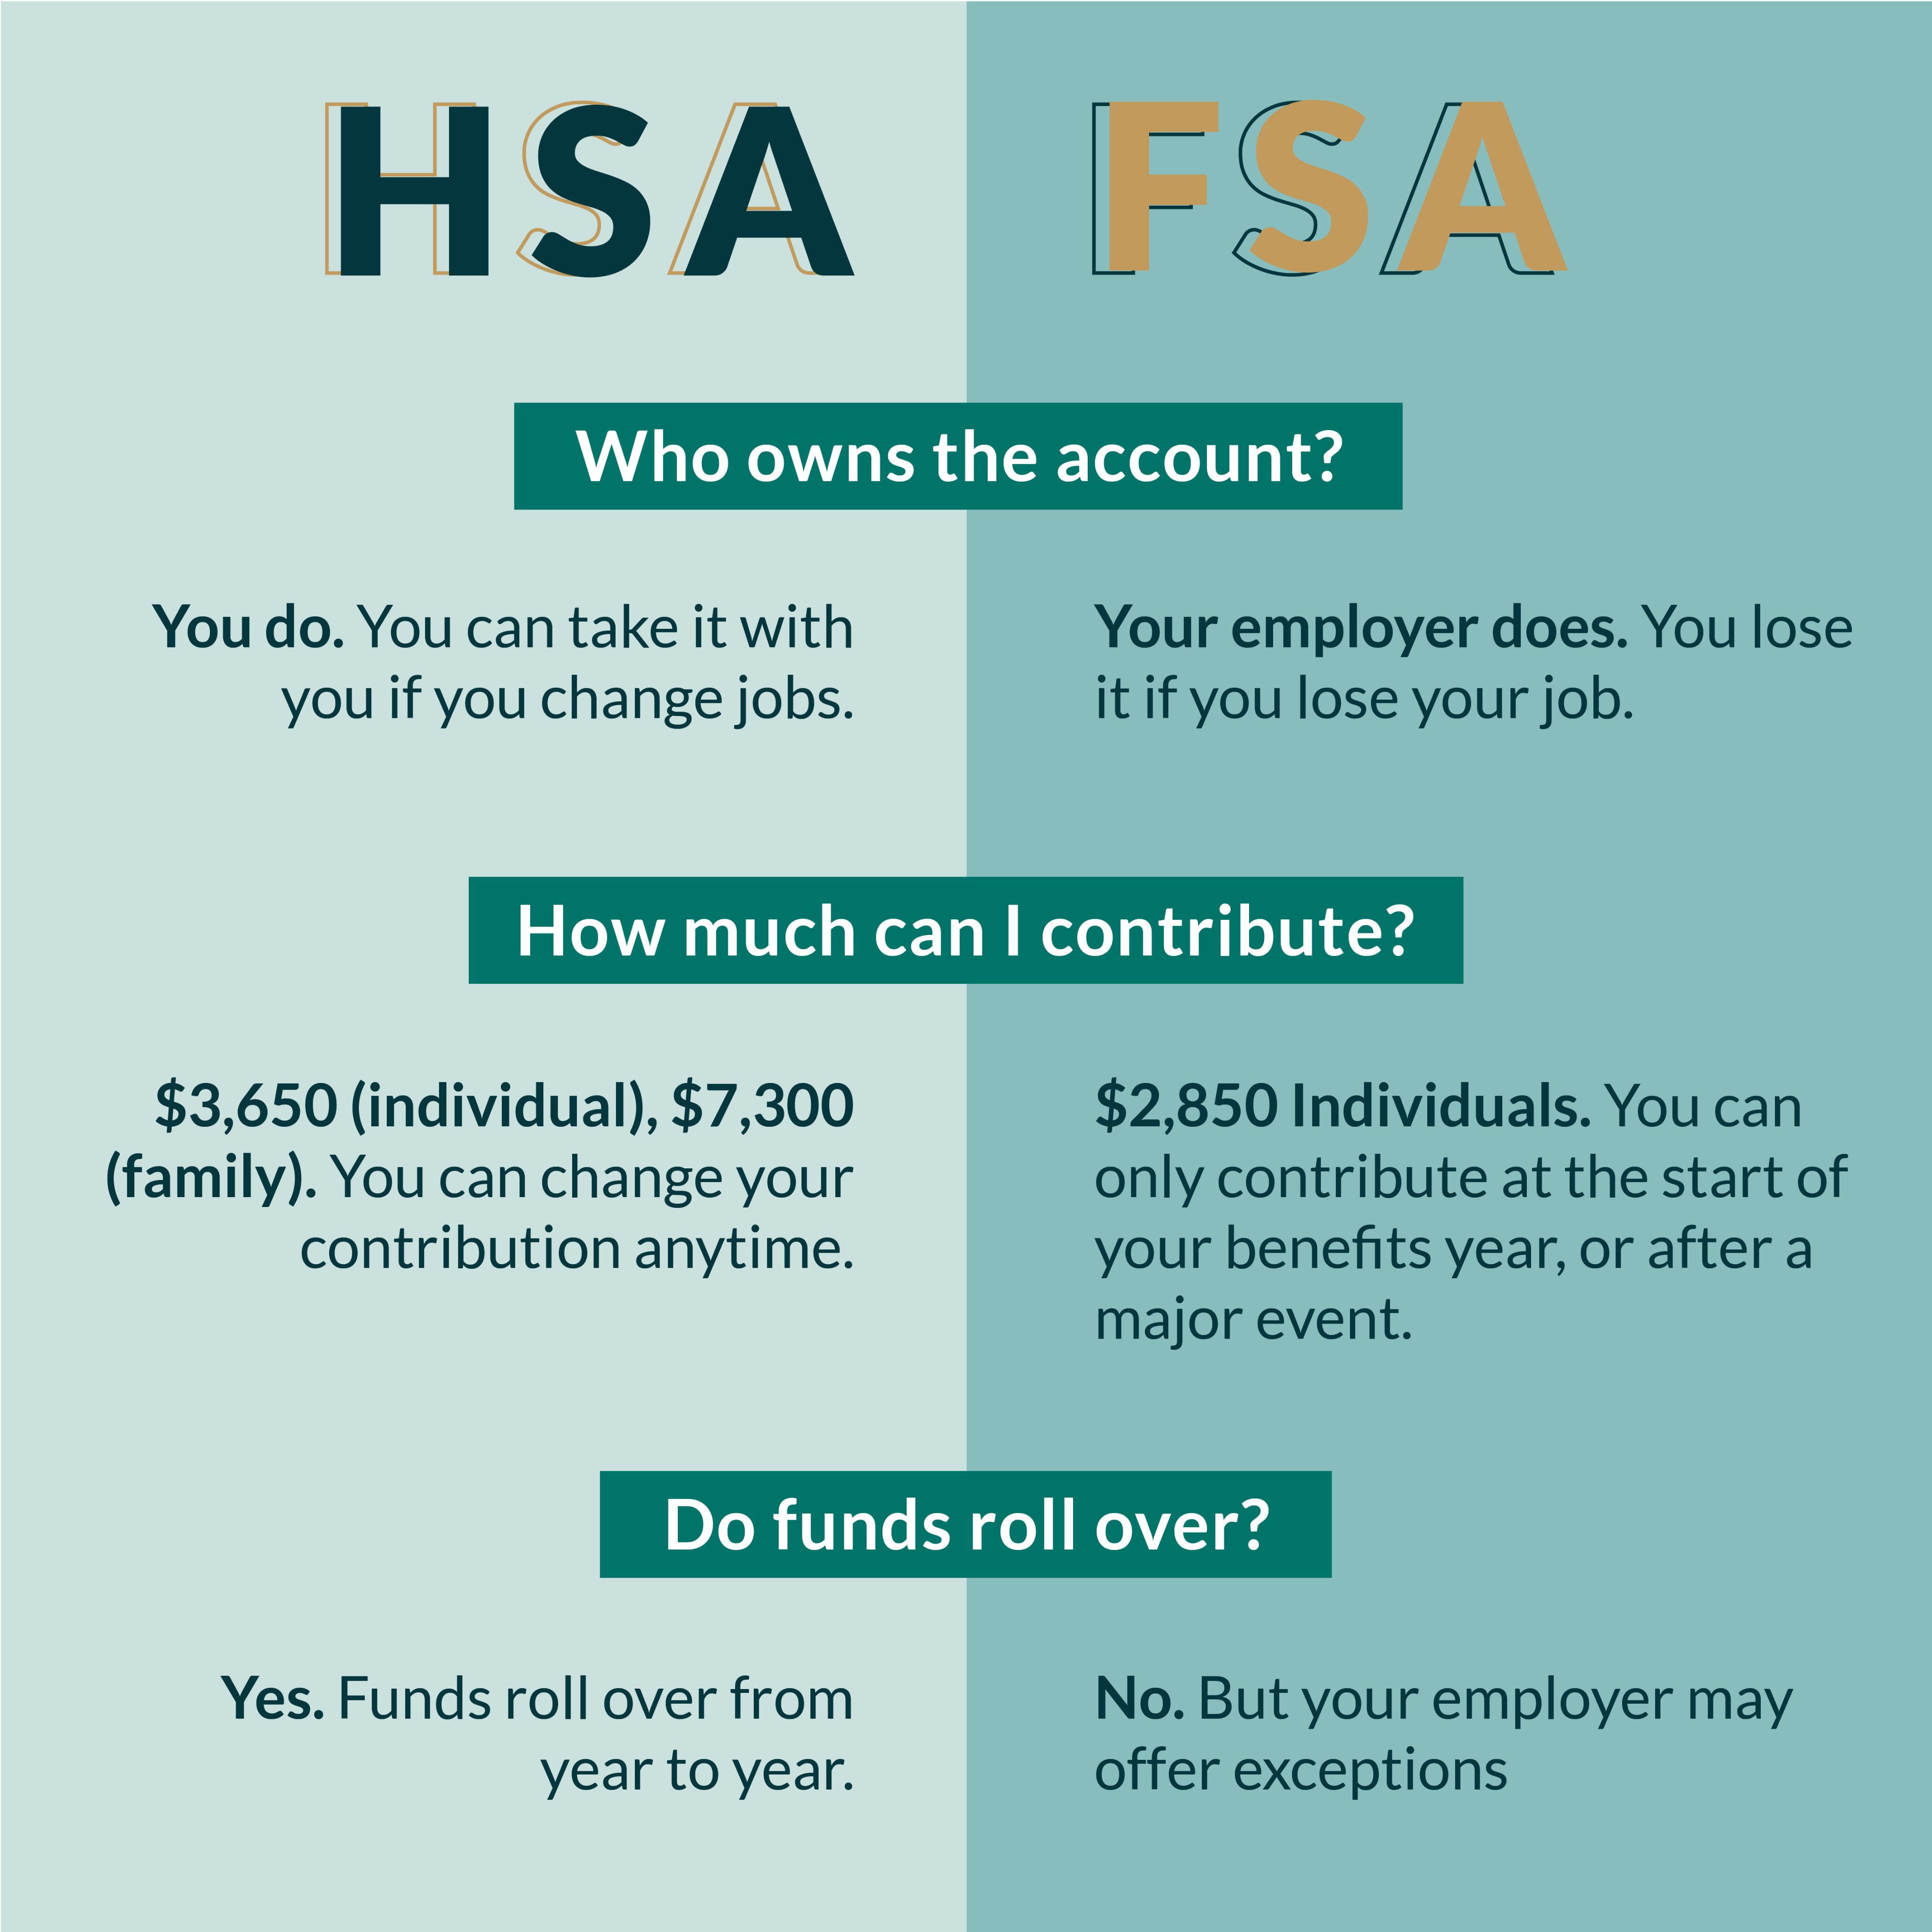 Here Are the Differences Between an HSA and FSA